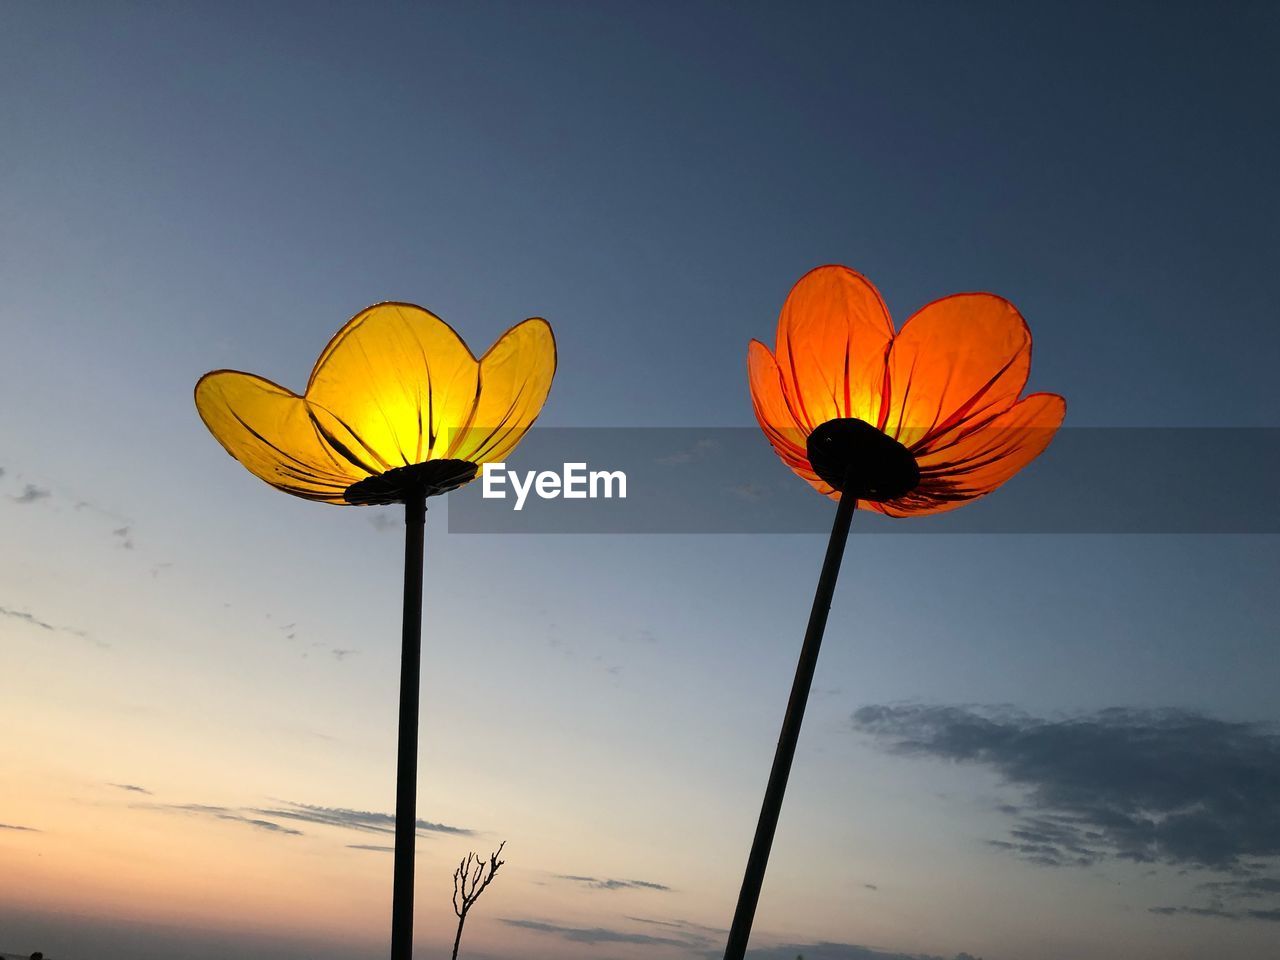 Low angle view of orange flower against sky during sunset